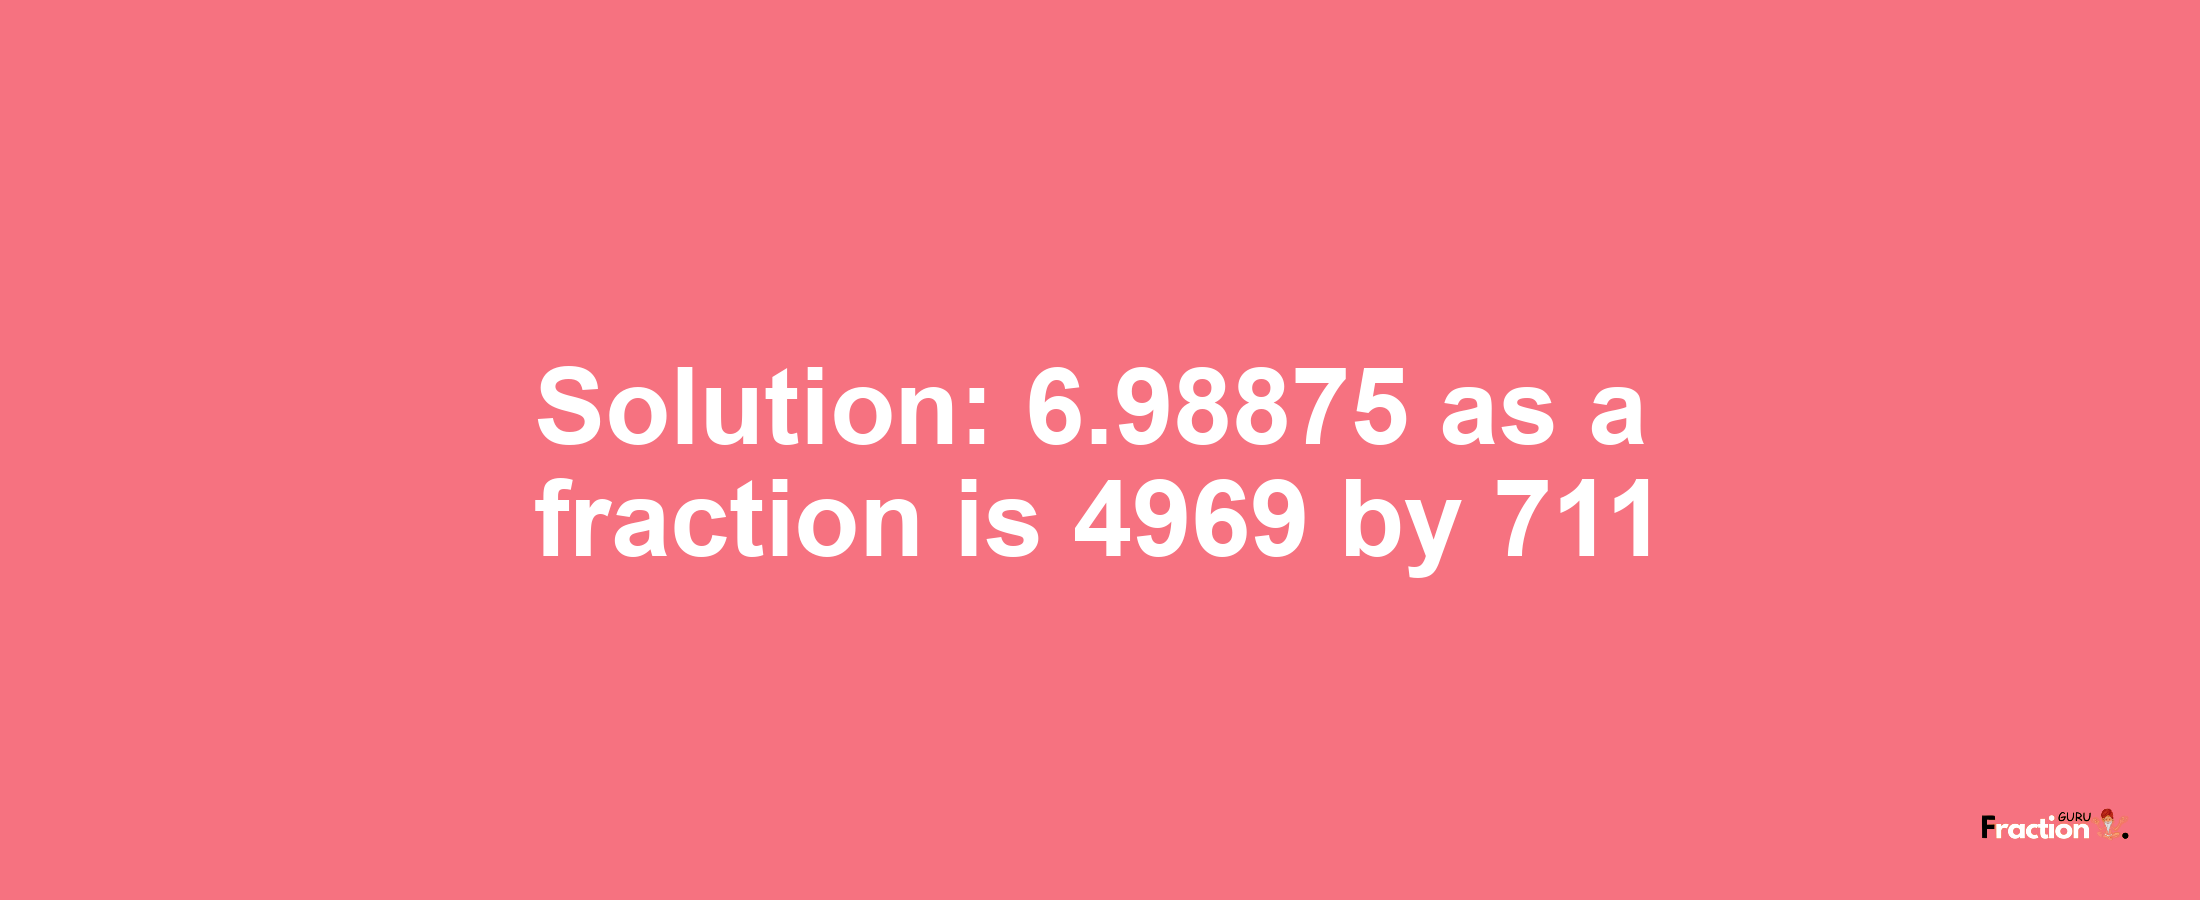 Solution:6.98875 as a fraction is 4969/711